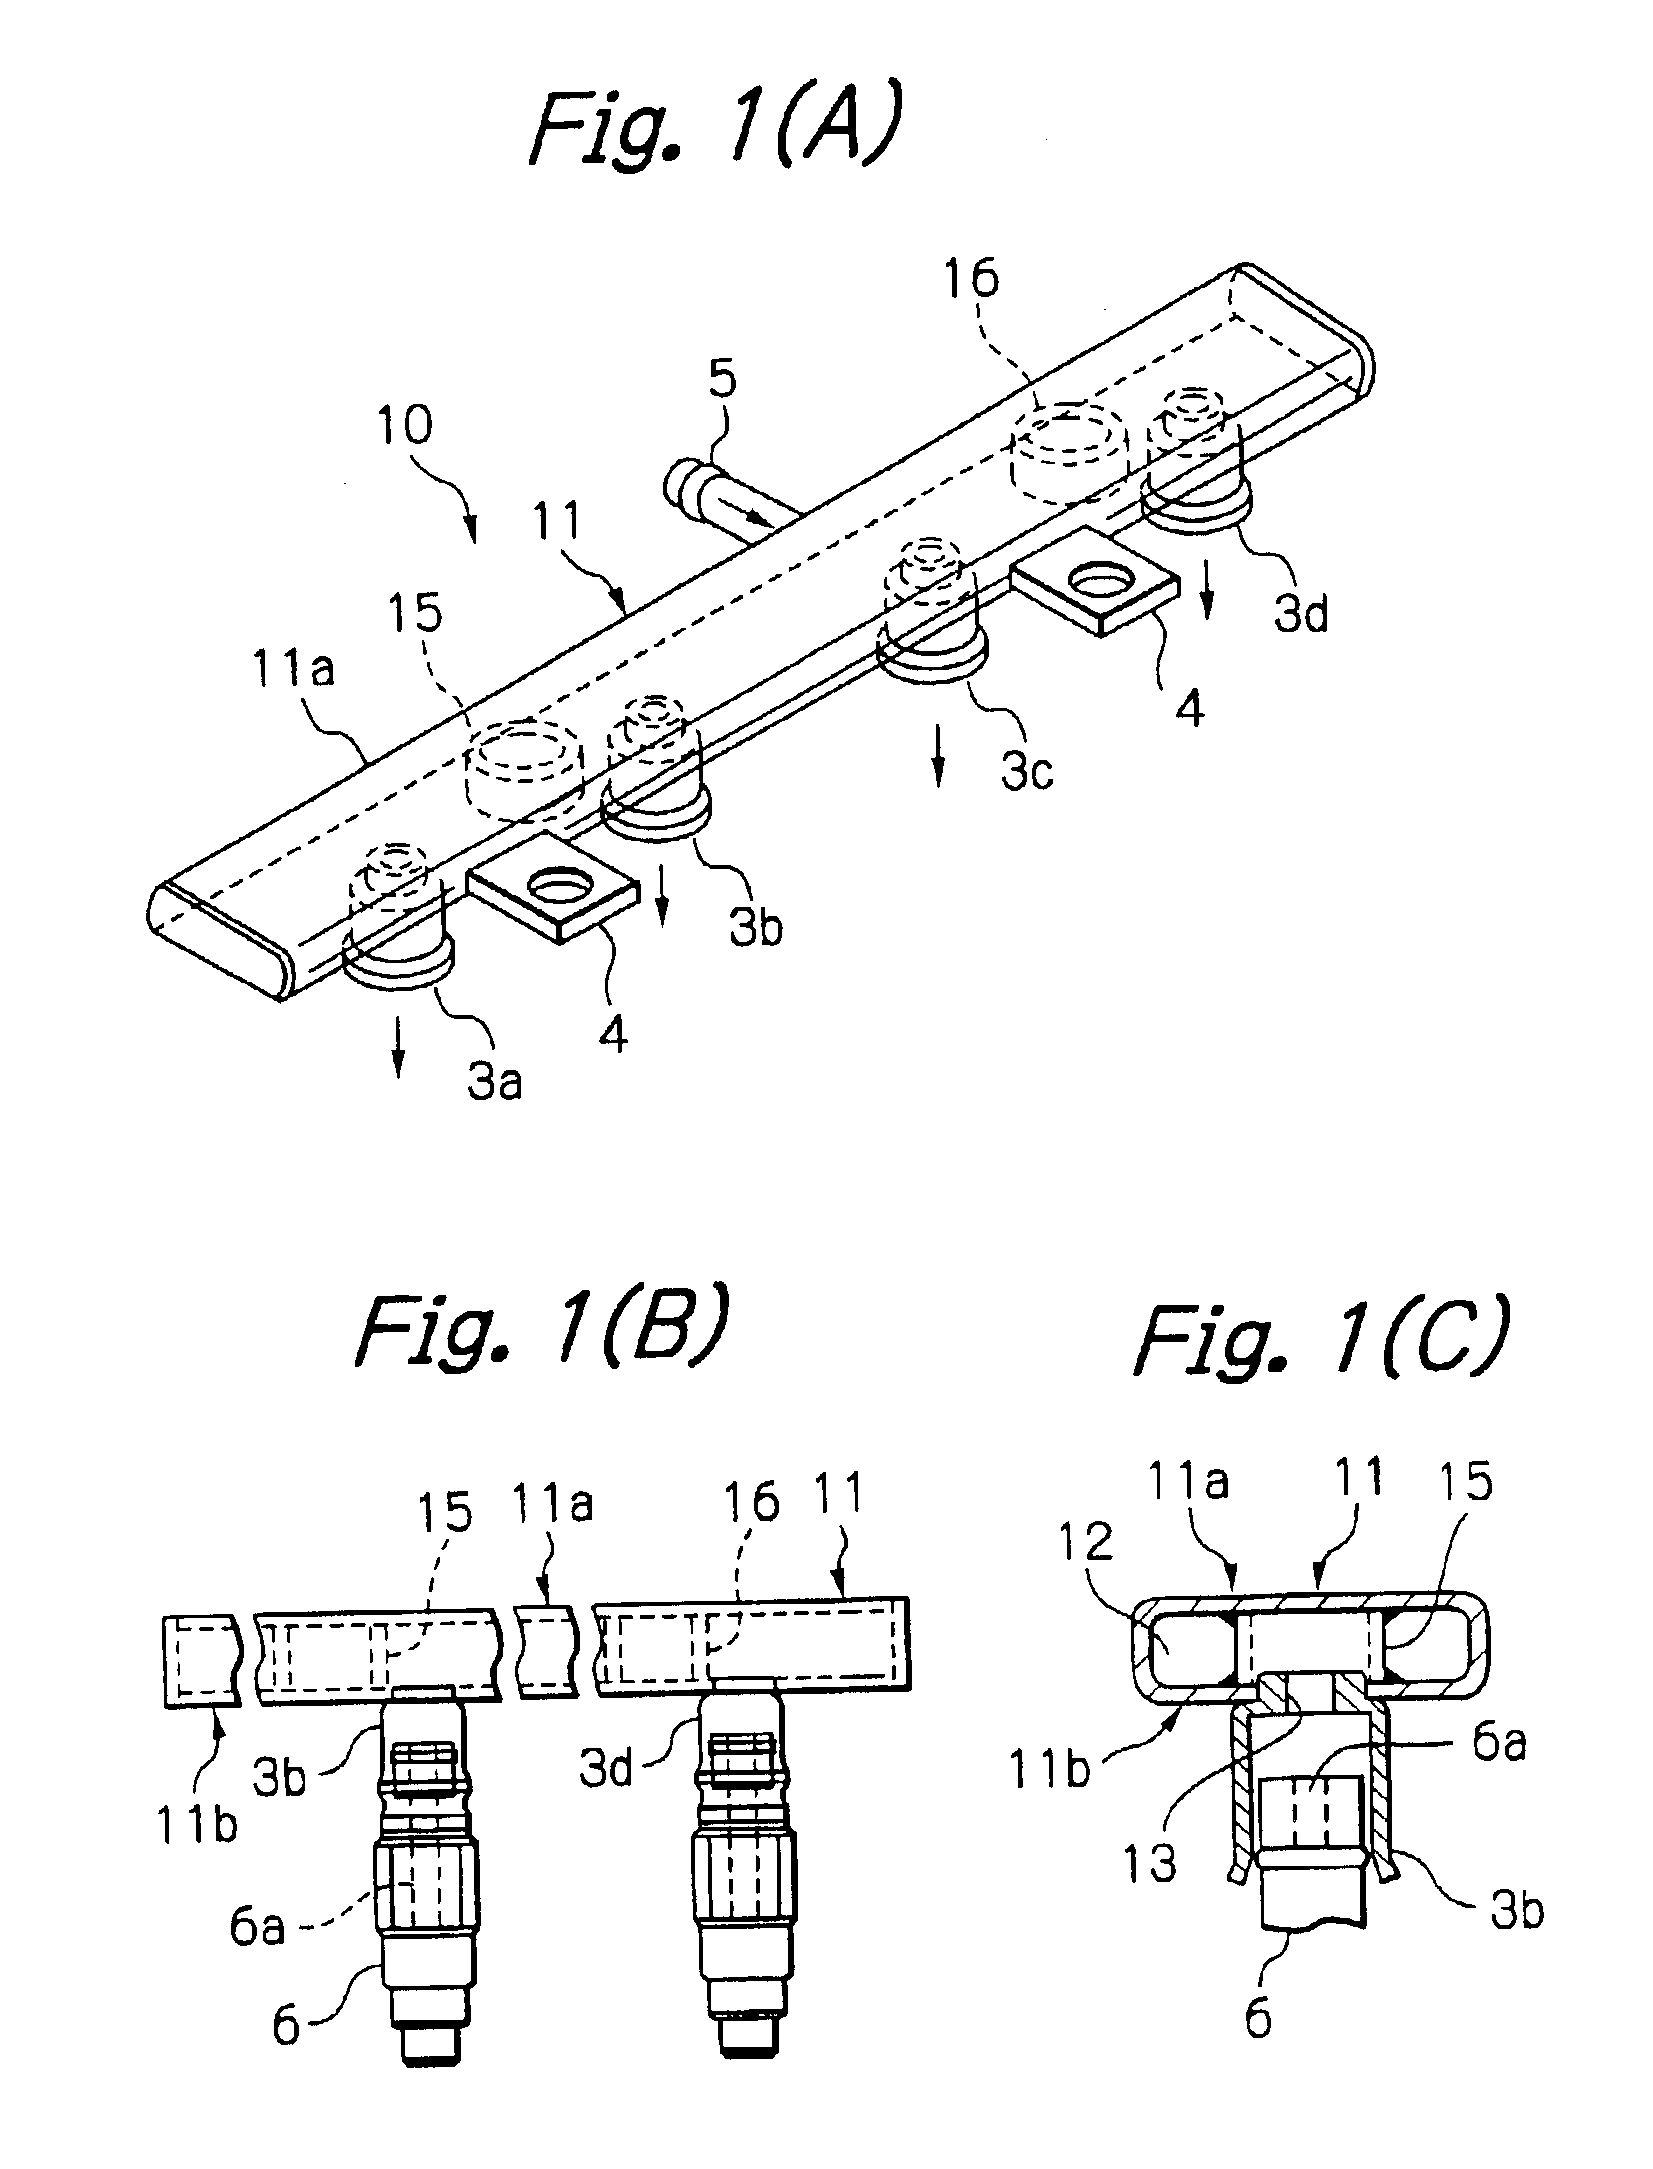 Fuel delivery rail assembly